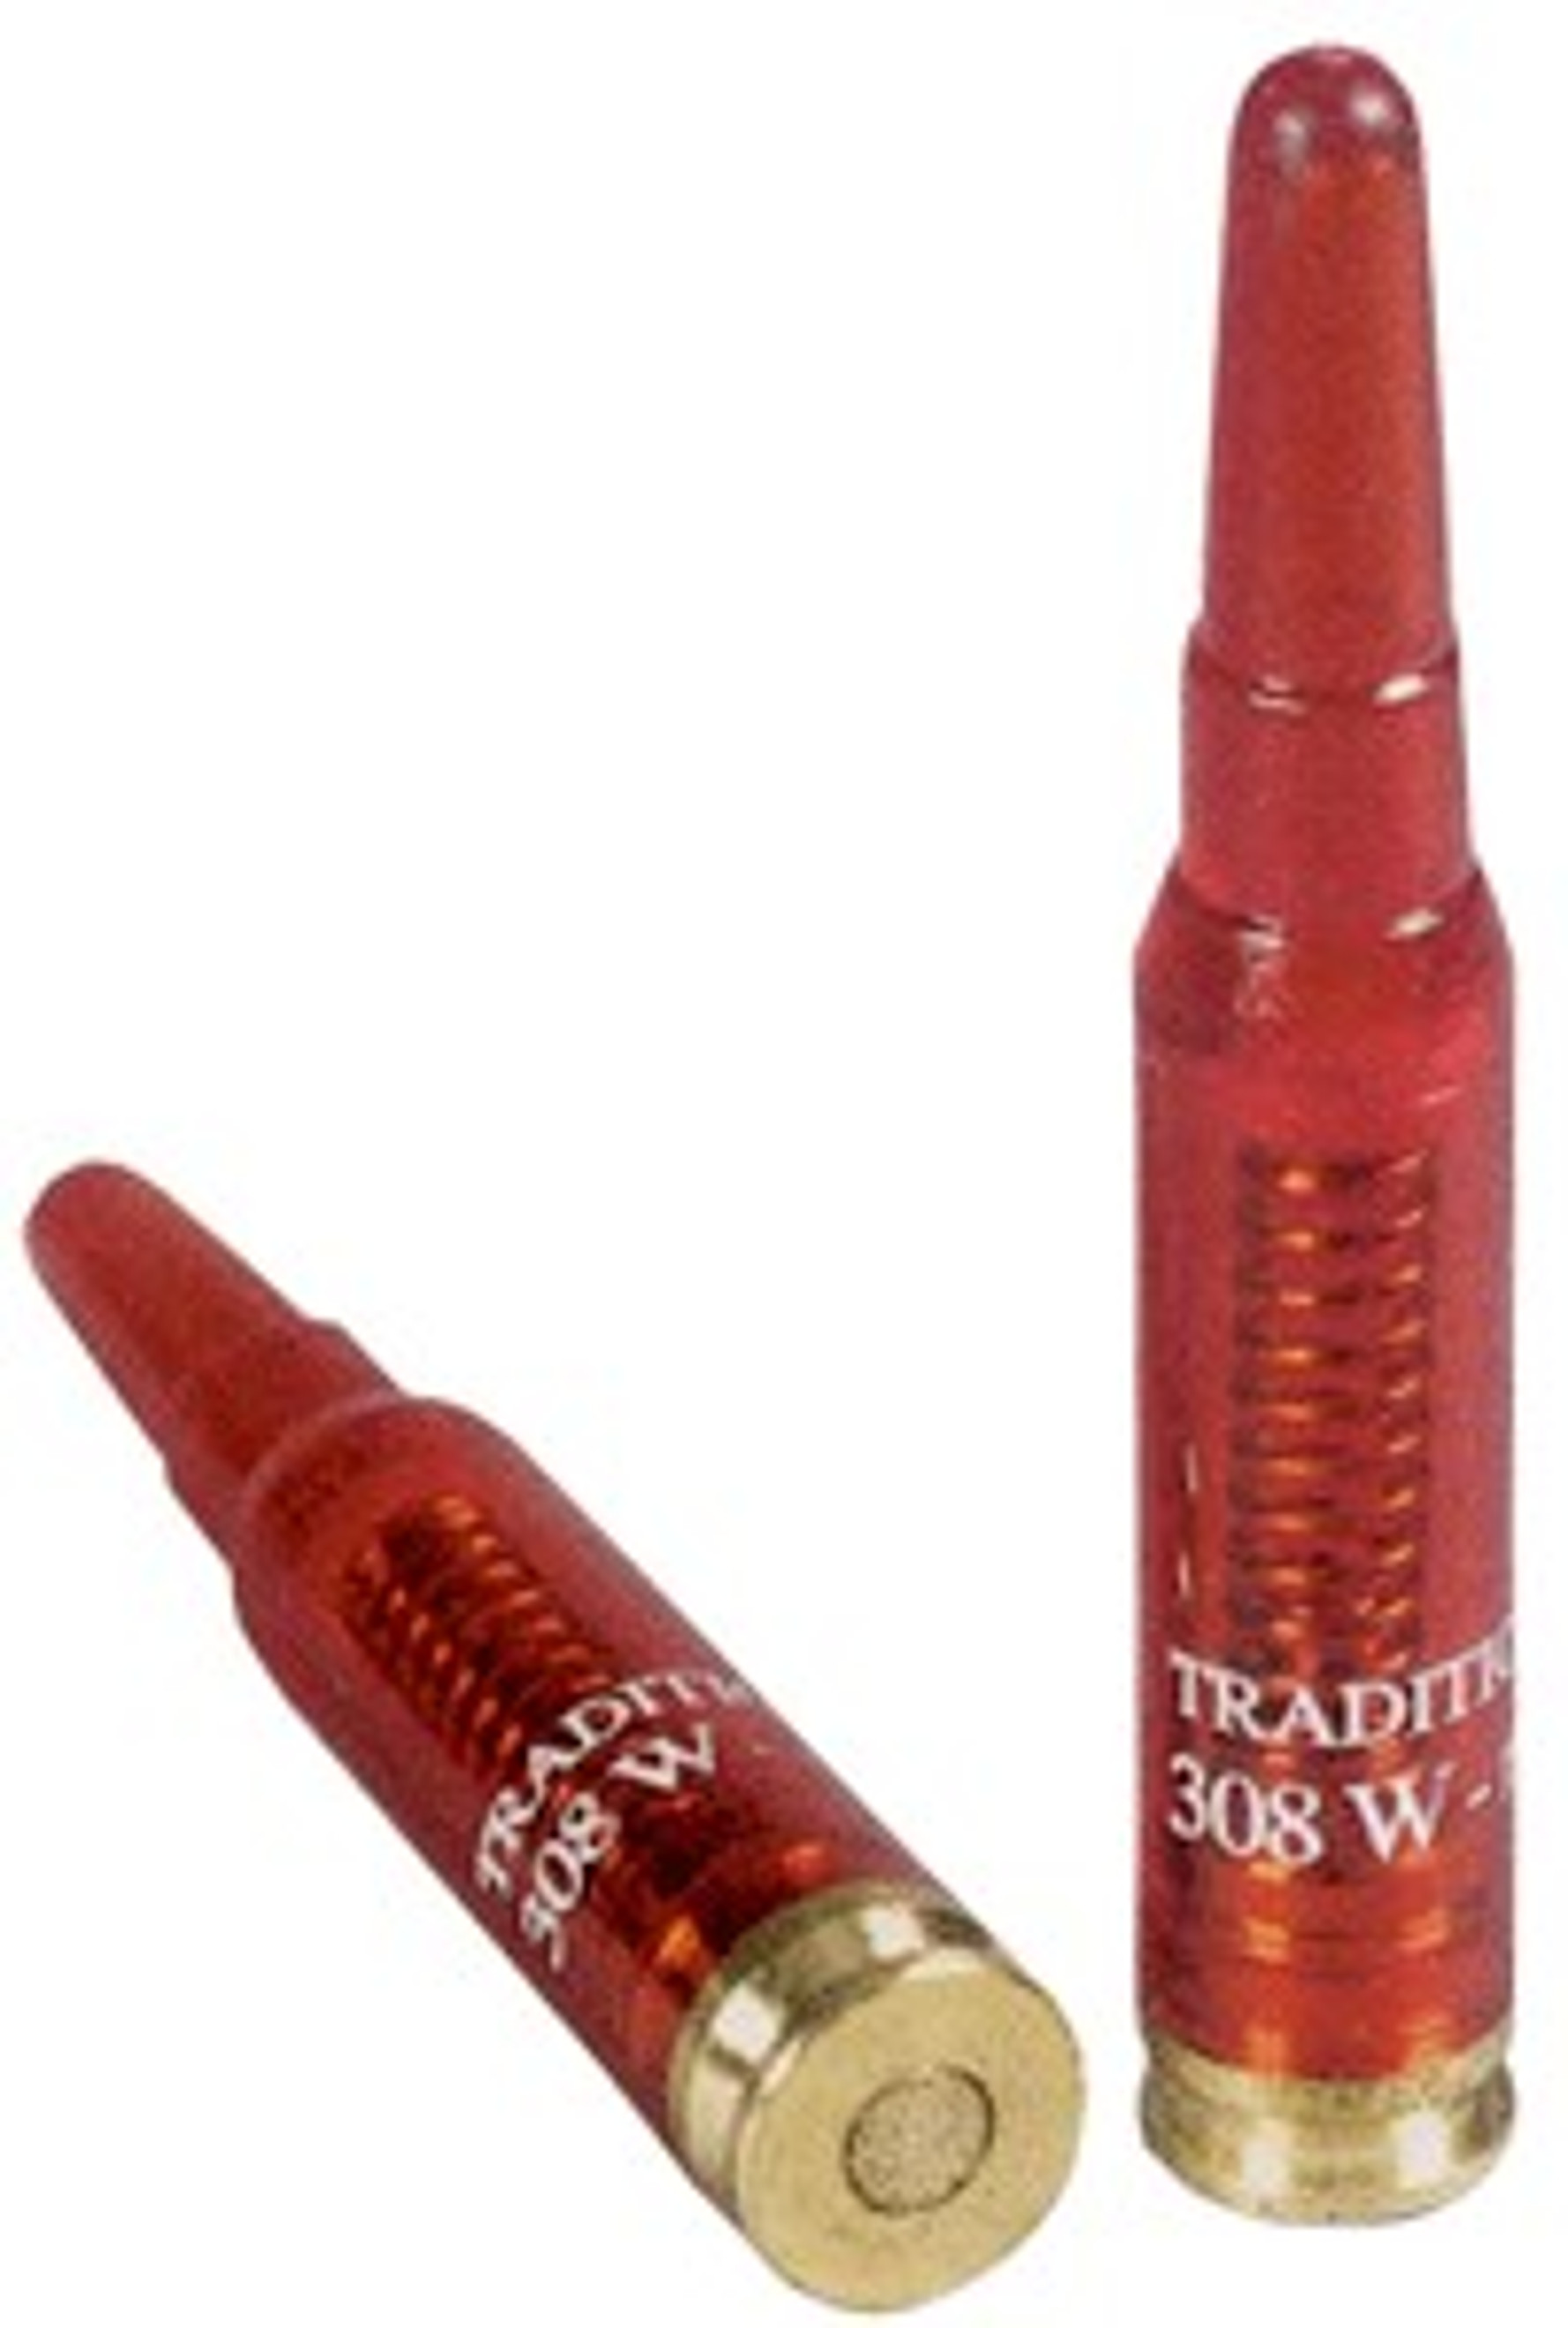 Traditions SnapCap .308 Winchester